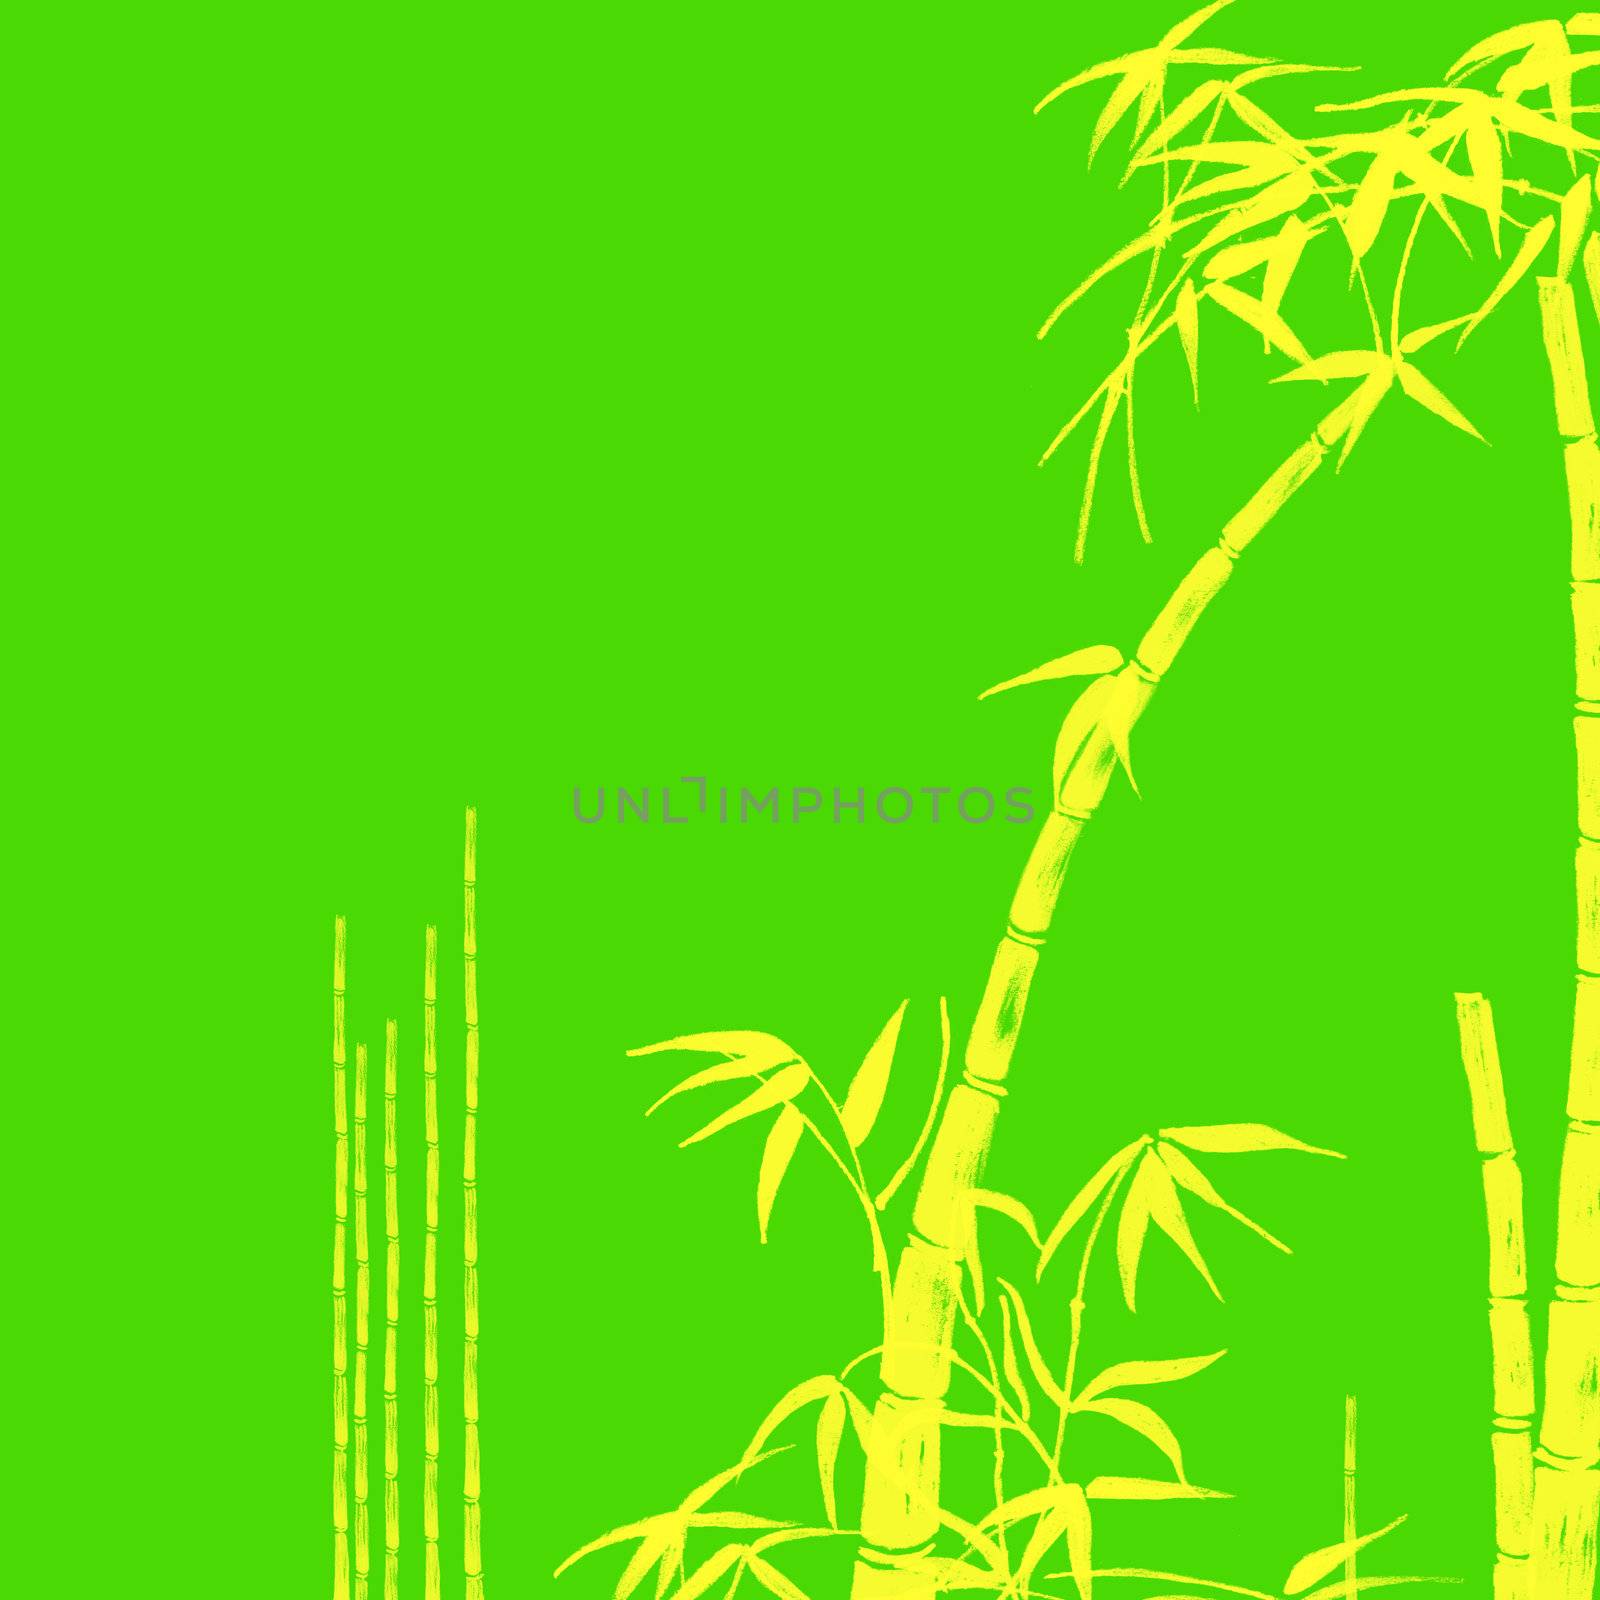 Yellow Bamboo Tropical Design Illustration on Green Background